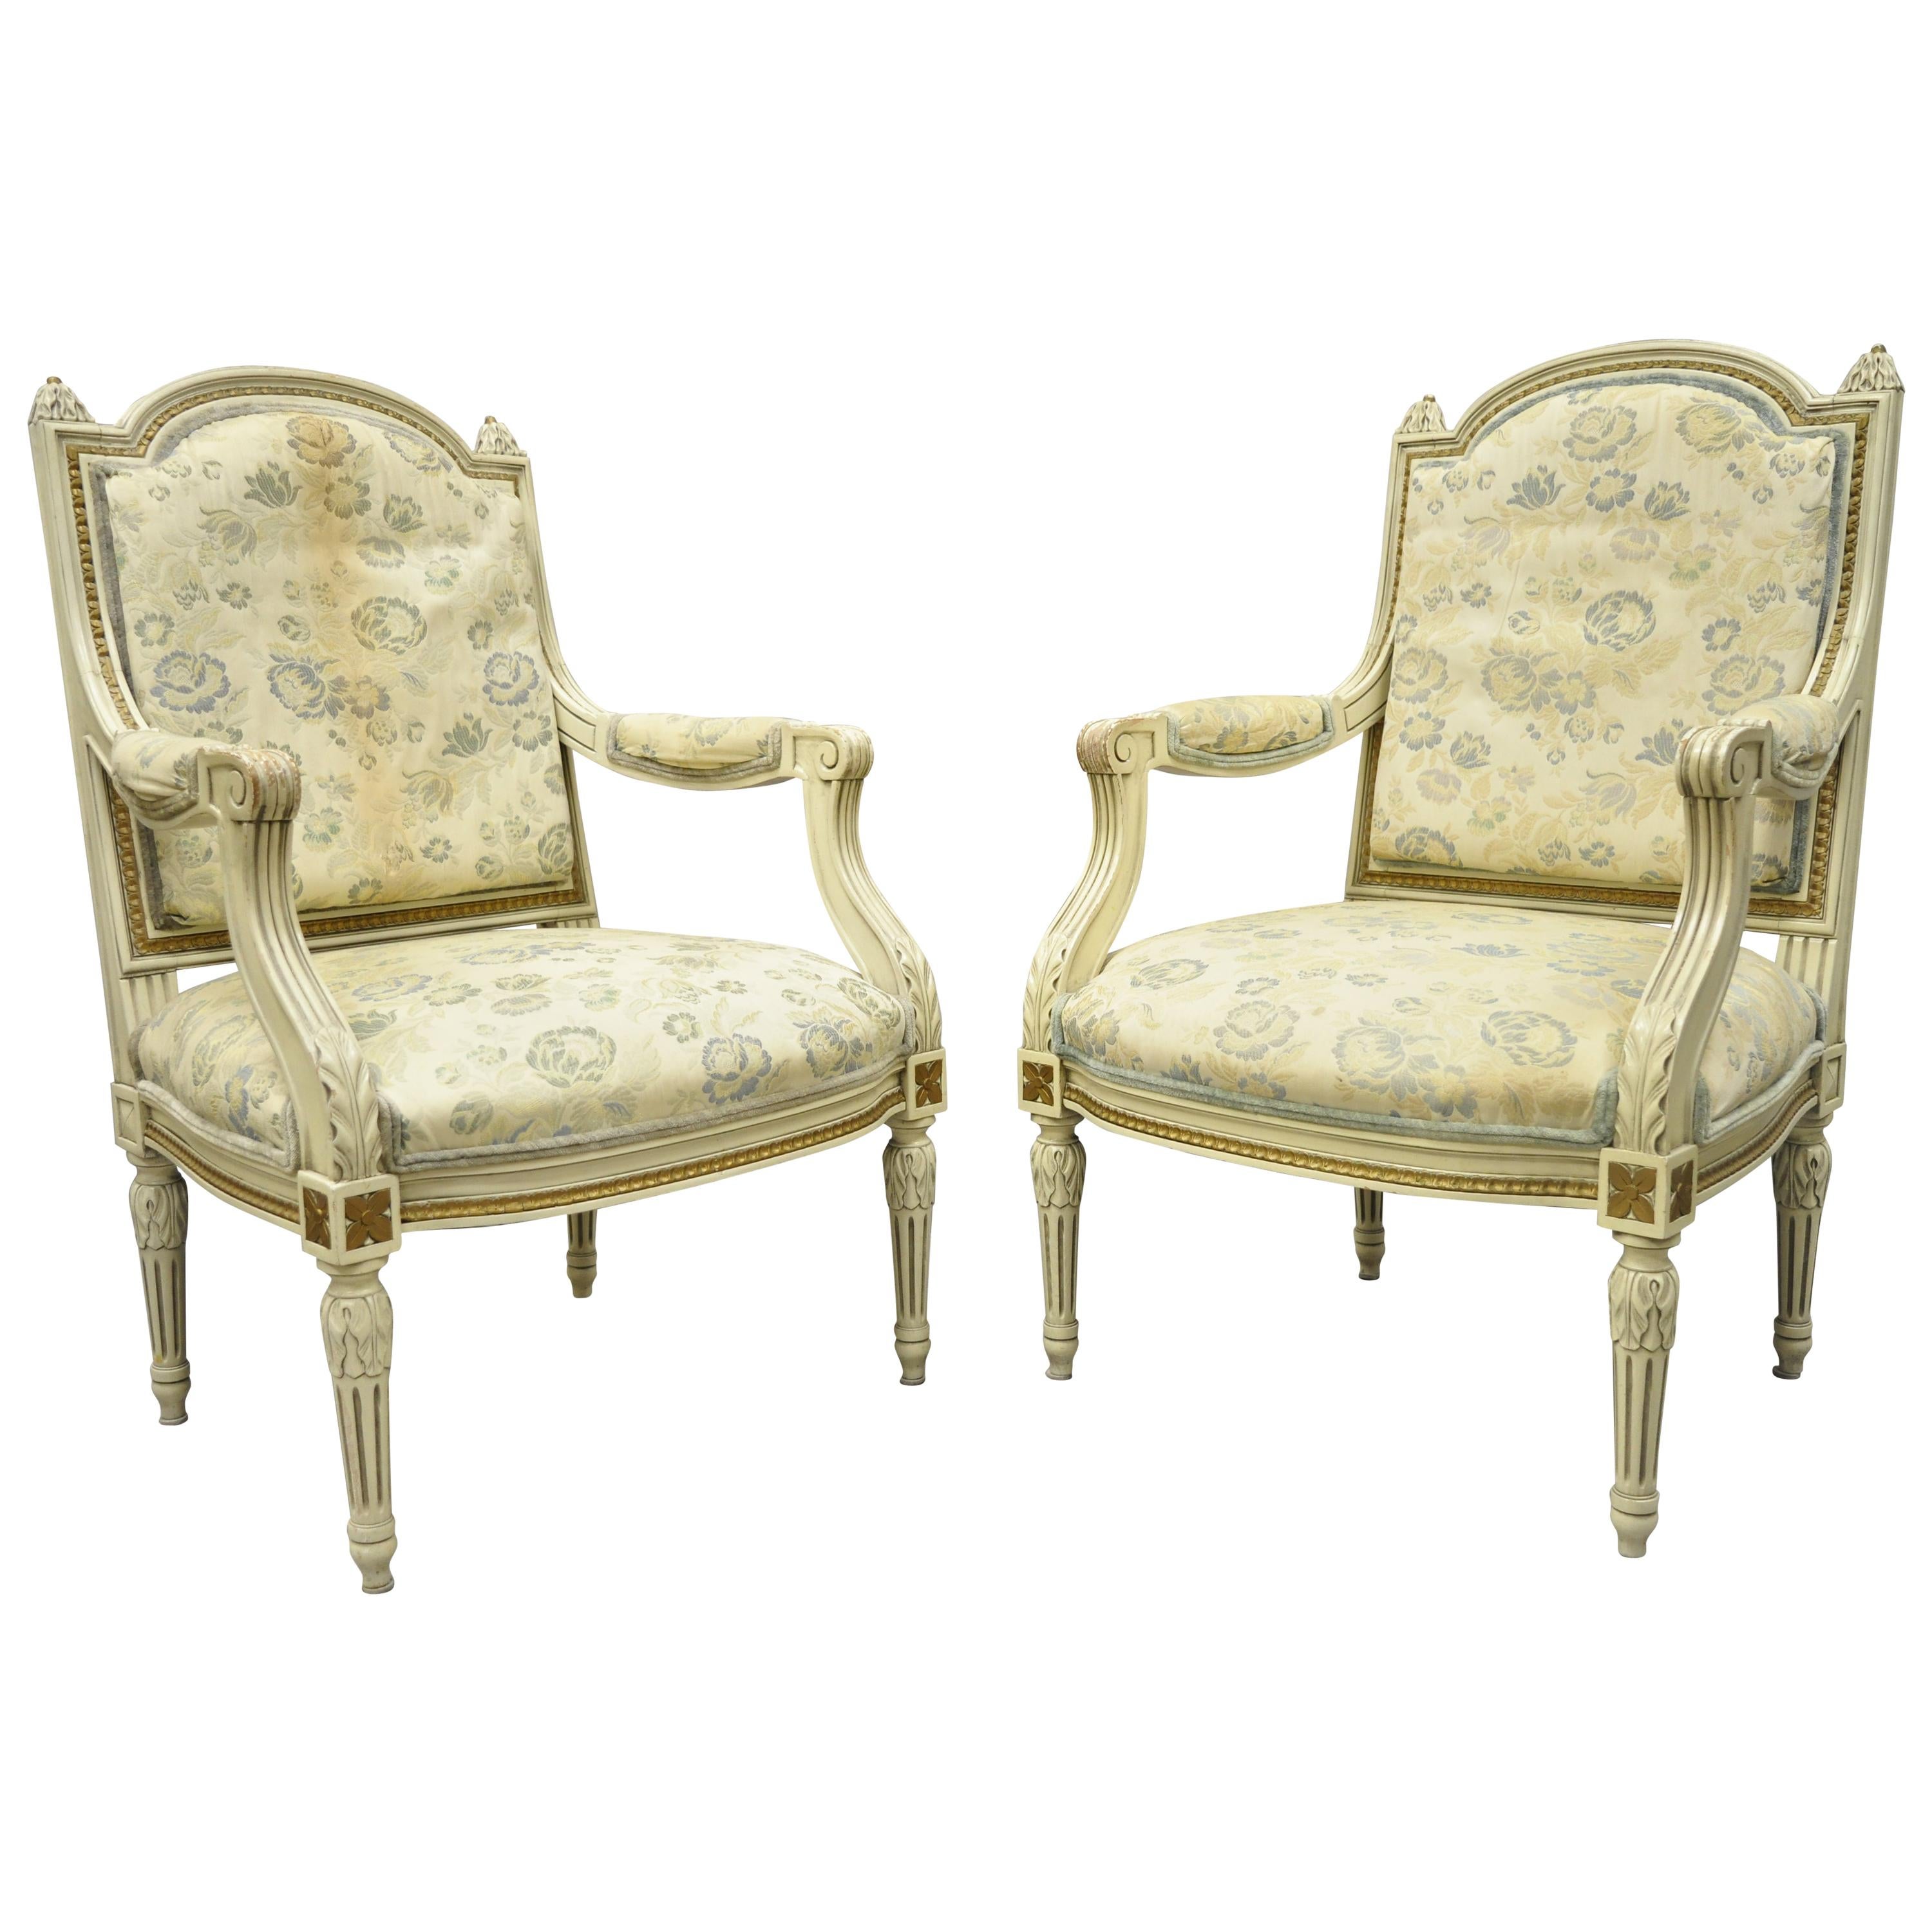 Vintage French Provincial Louis XVI Cream Painted Fauteuil Armchairs, a Pair